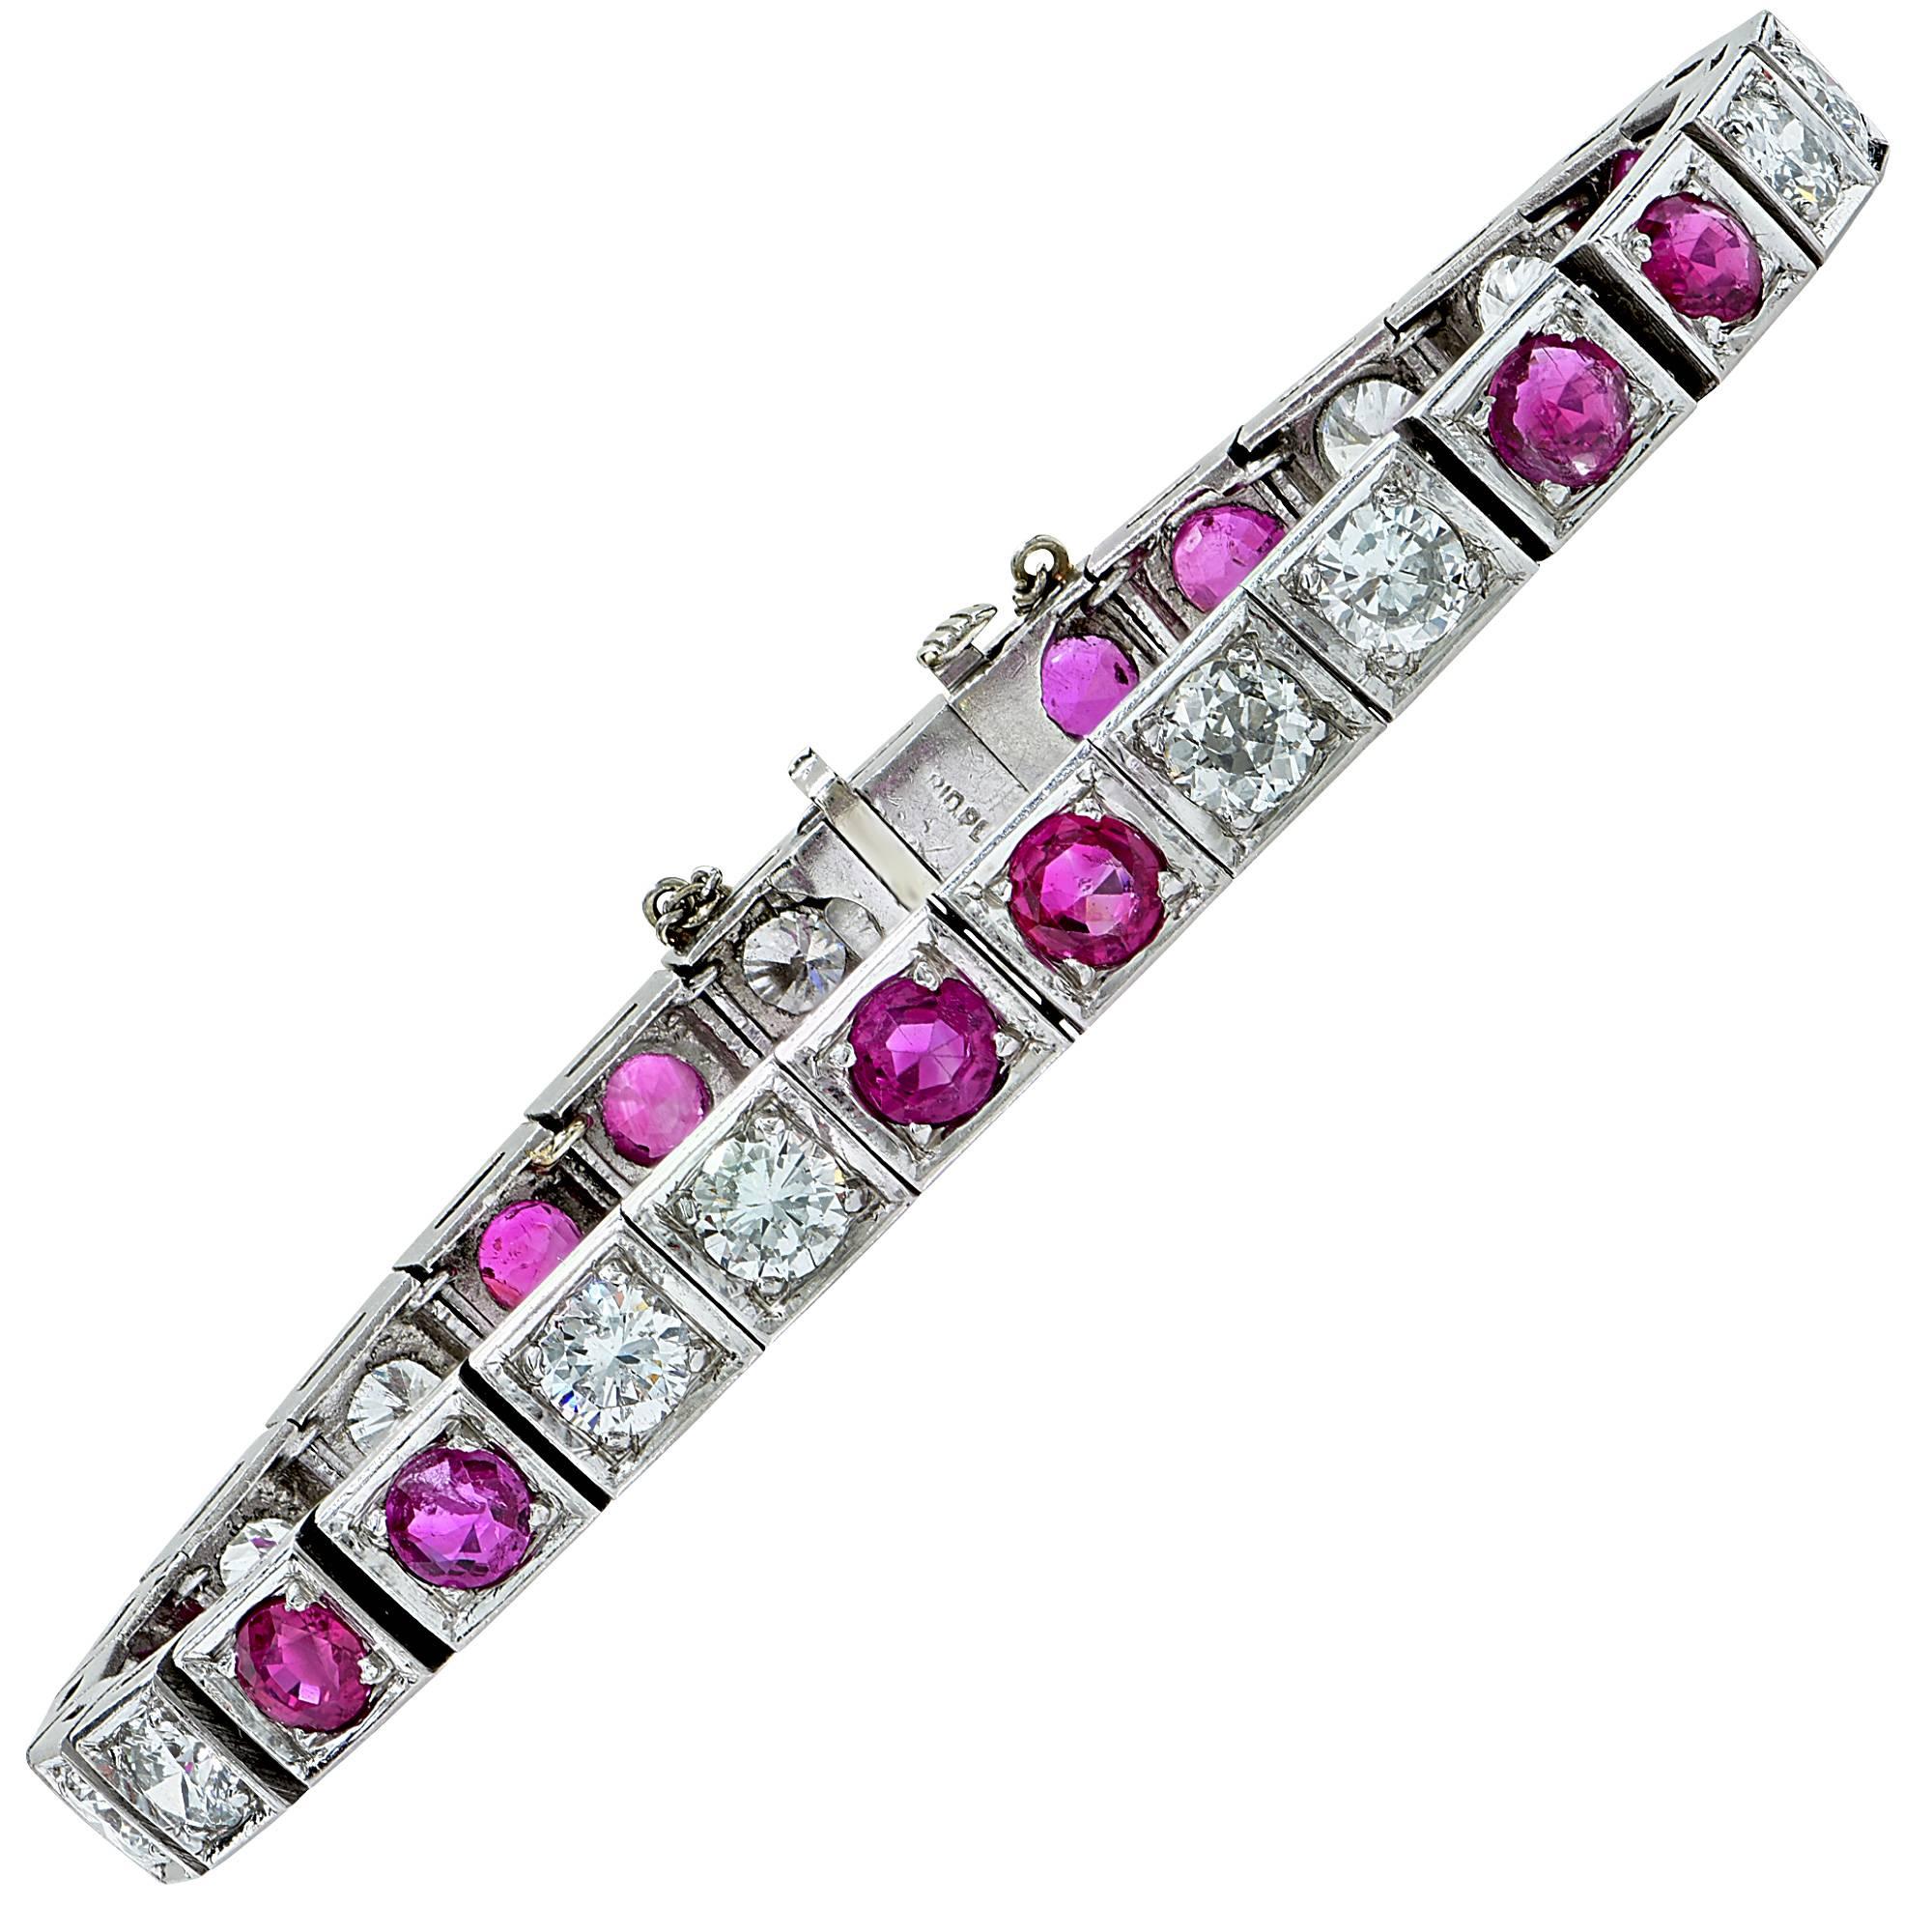 Stunning platinum bracelet featuring 14 round cut Burma rubies weighing approximately 6cts and 14 round brilliant cut diamonds weighing approximately 5cts G color and VS-SI clarity.

The bracelet measures 7 inches in length by .24 inch in width by